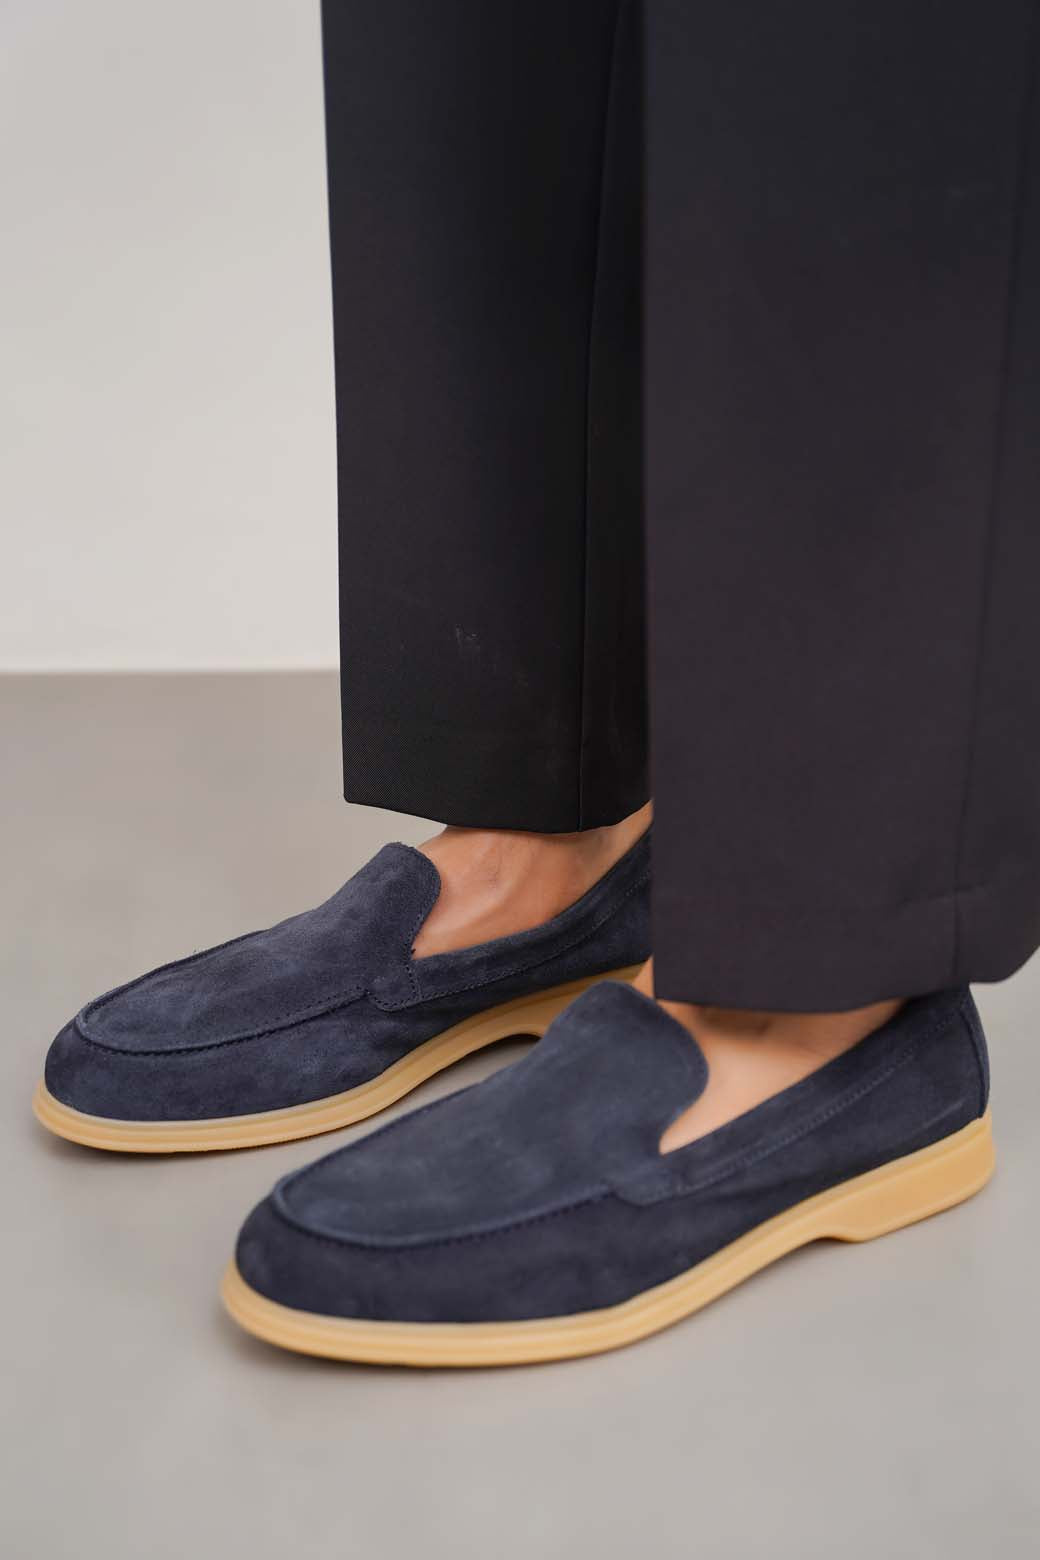 NAVY SLIP ON LOAFERS